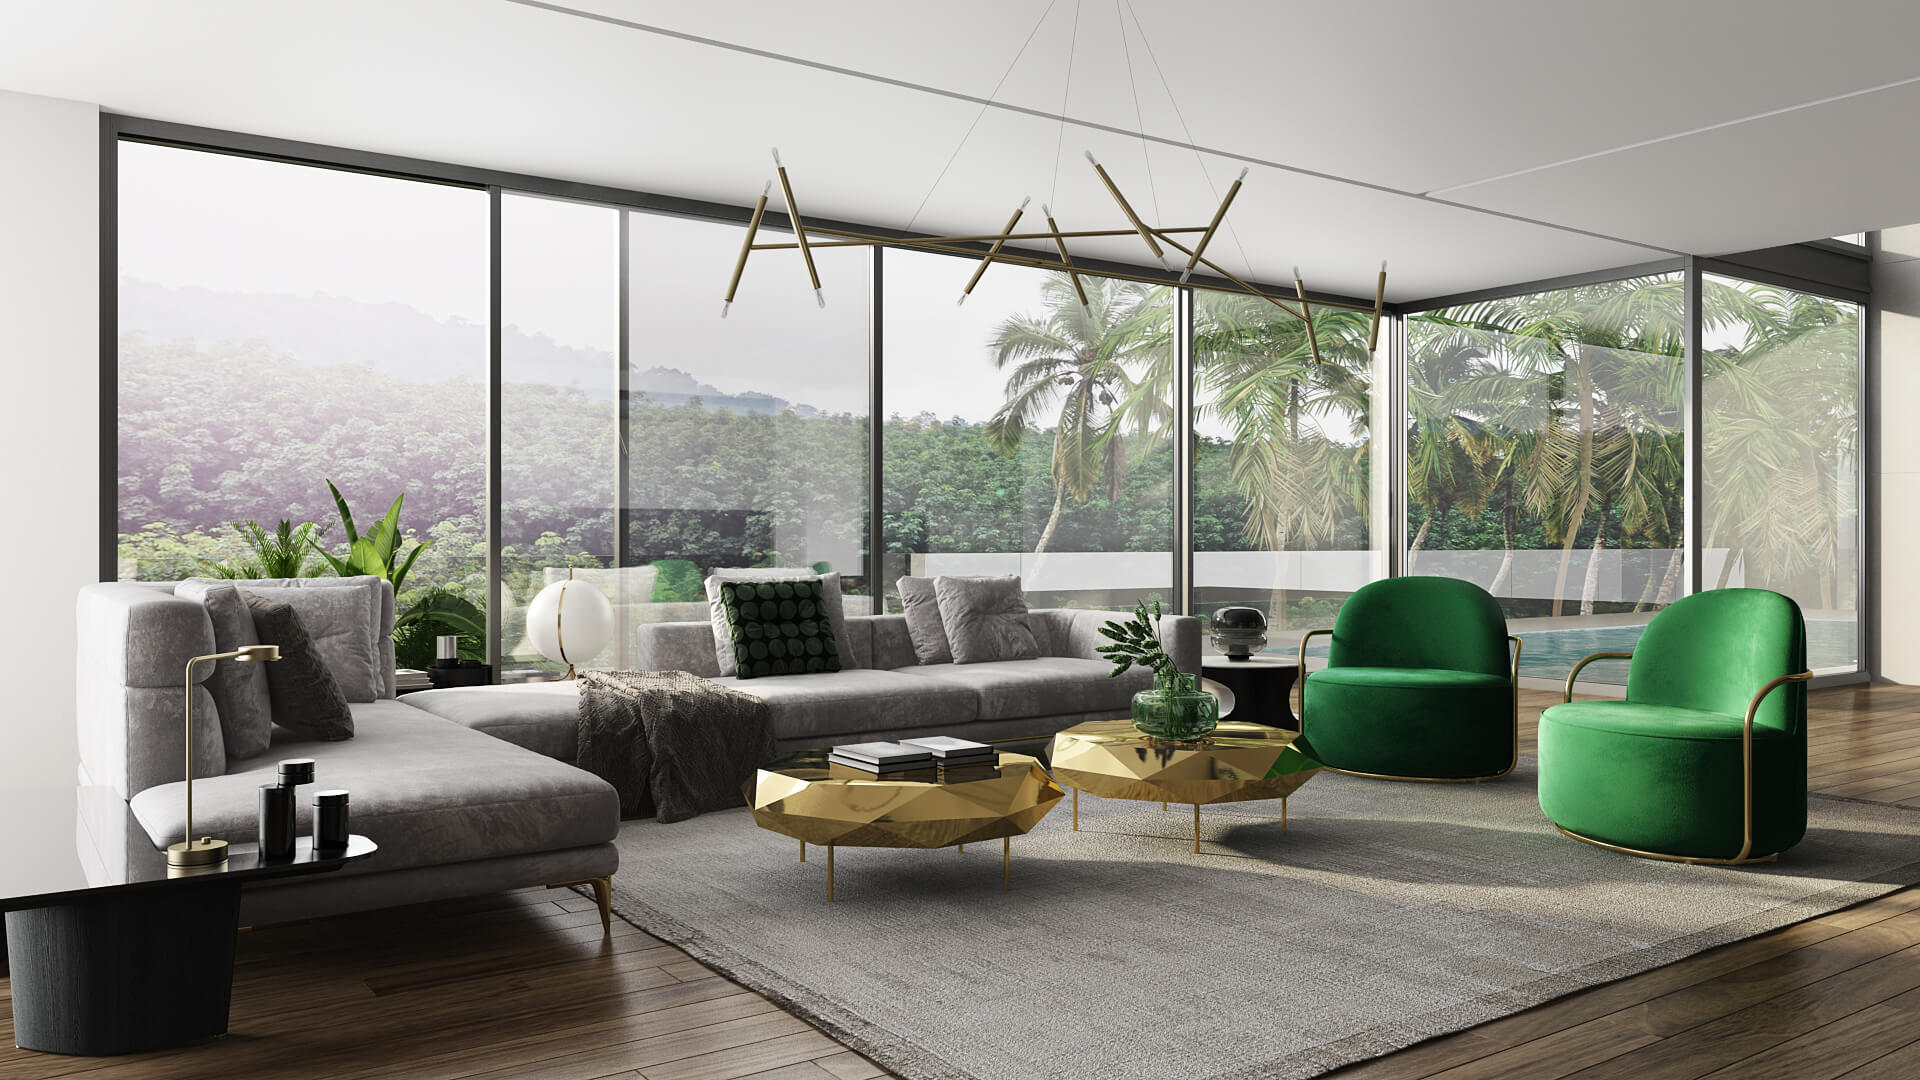 3D Visualization of a Modern Living Room Interior for a Brand’s Page